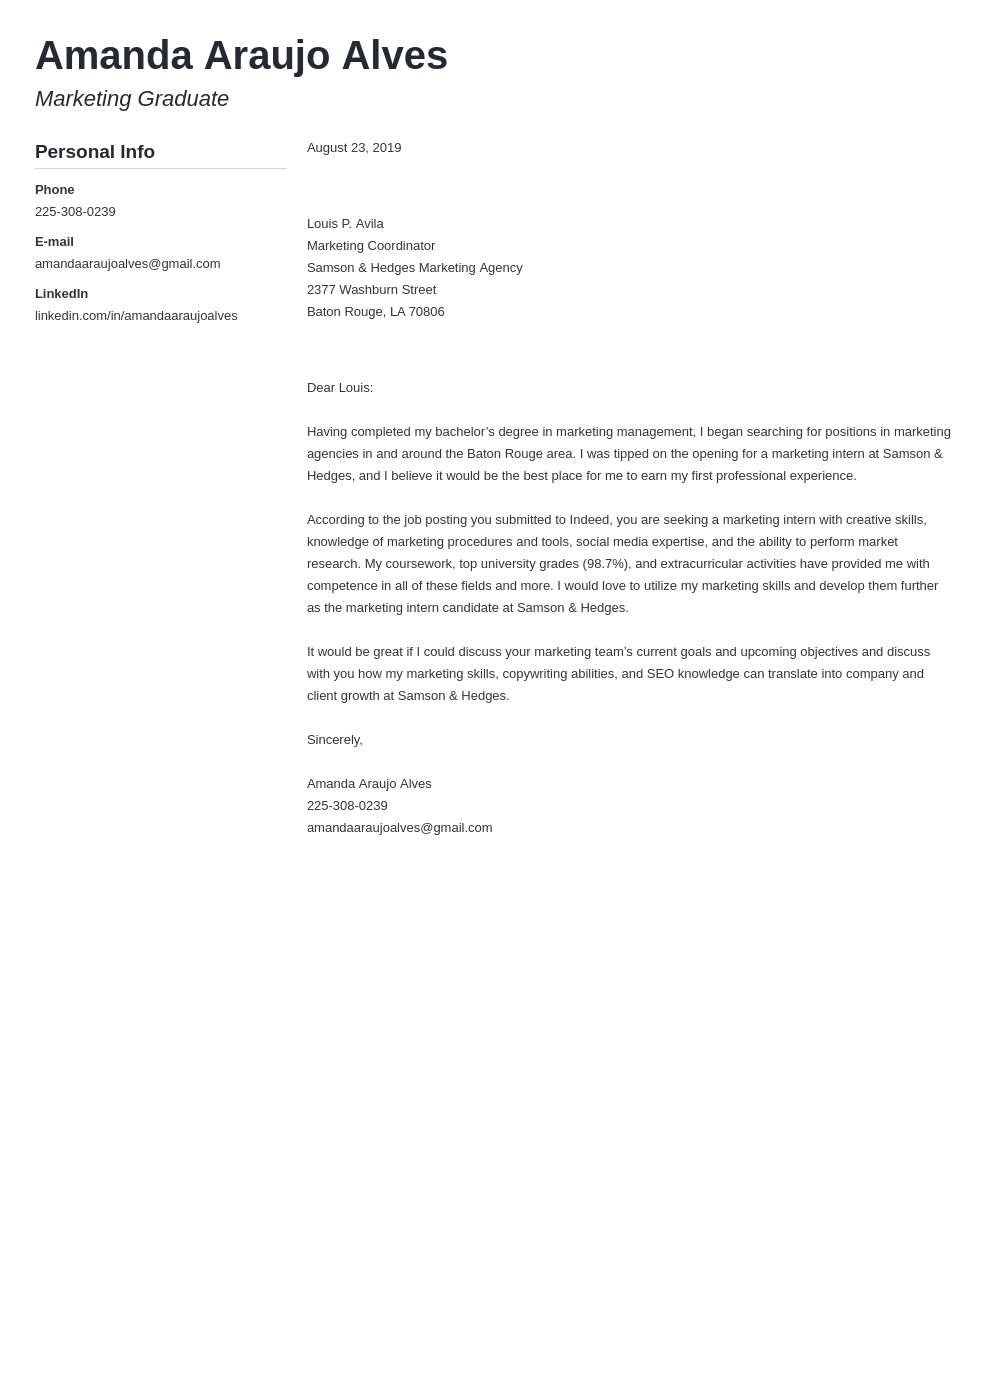 Marketing Cover Letter: Examples & Ready-To-Use Templates